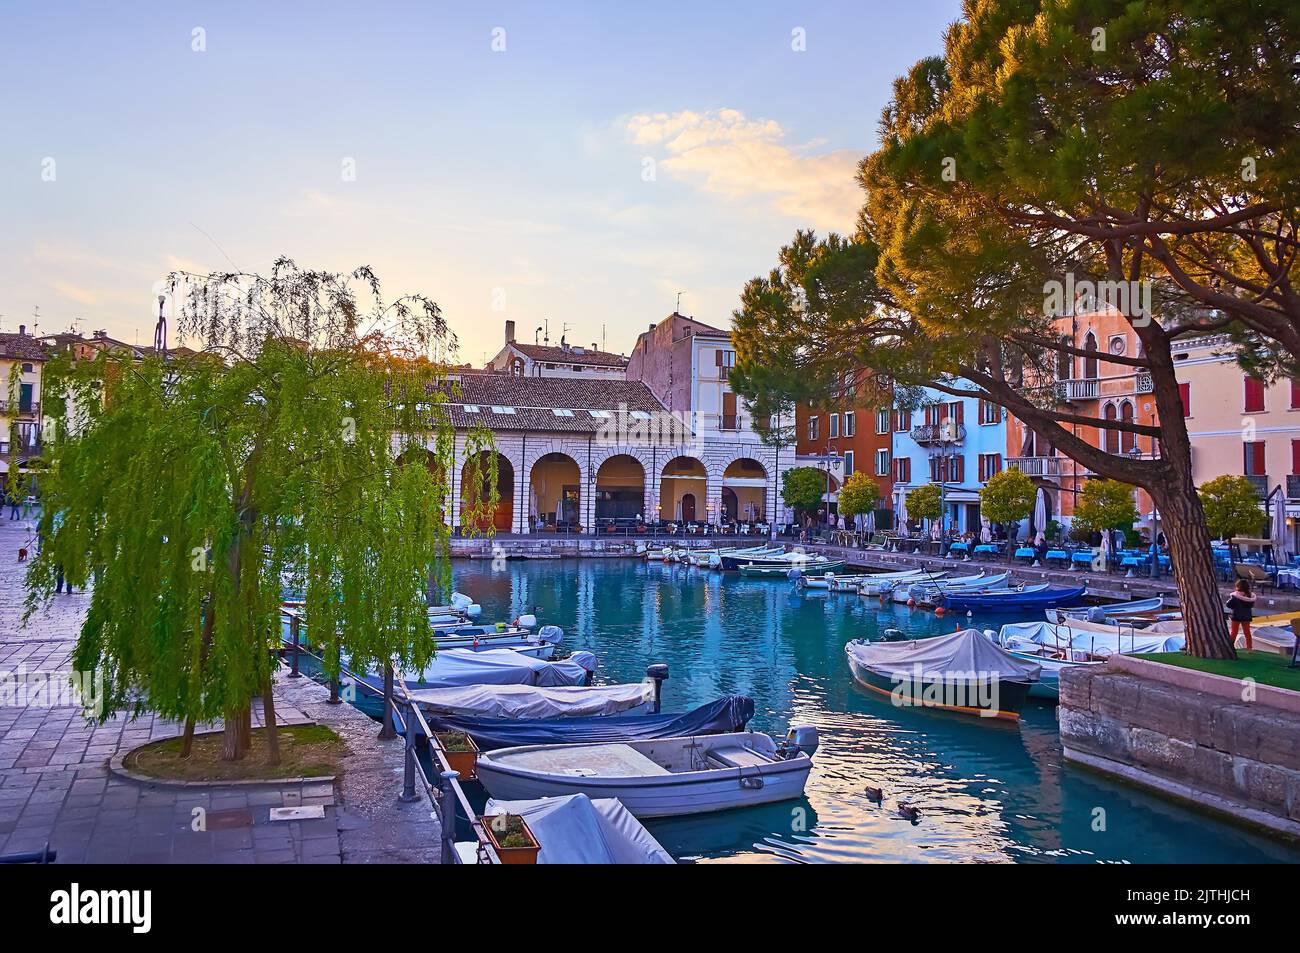 The lines of moored fishing boats in a small Porto Vecchio (Old Port), surrounded with old town housing in a bright sunset light, Desenzano del Garda, Stock Photo